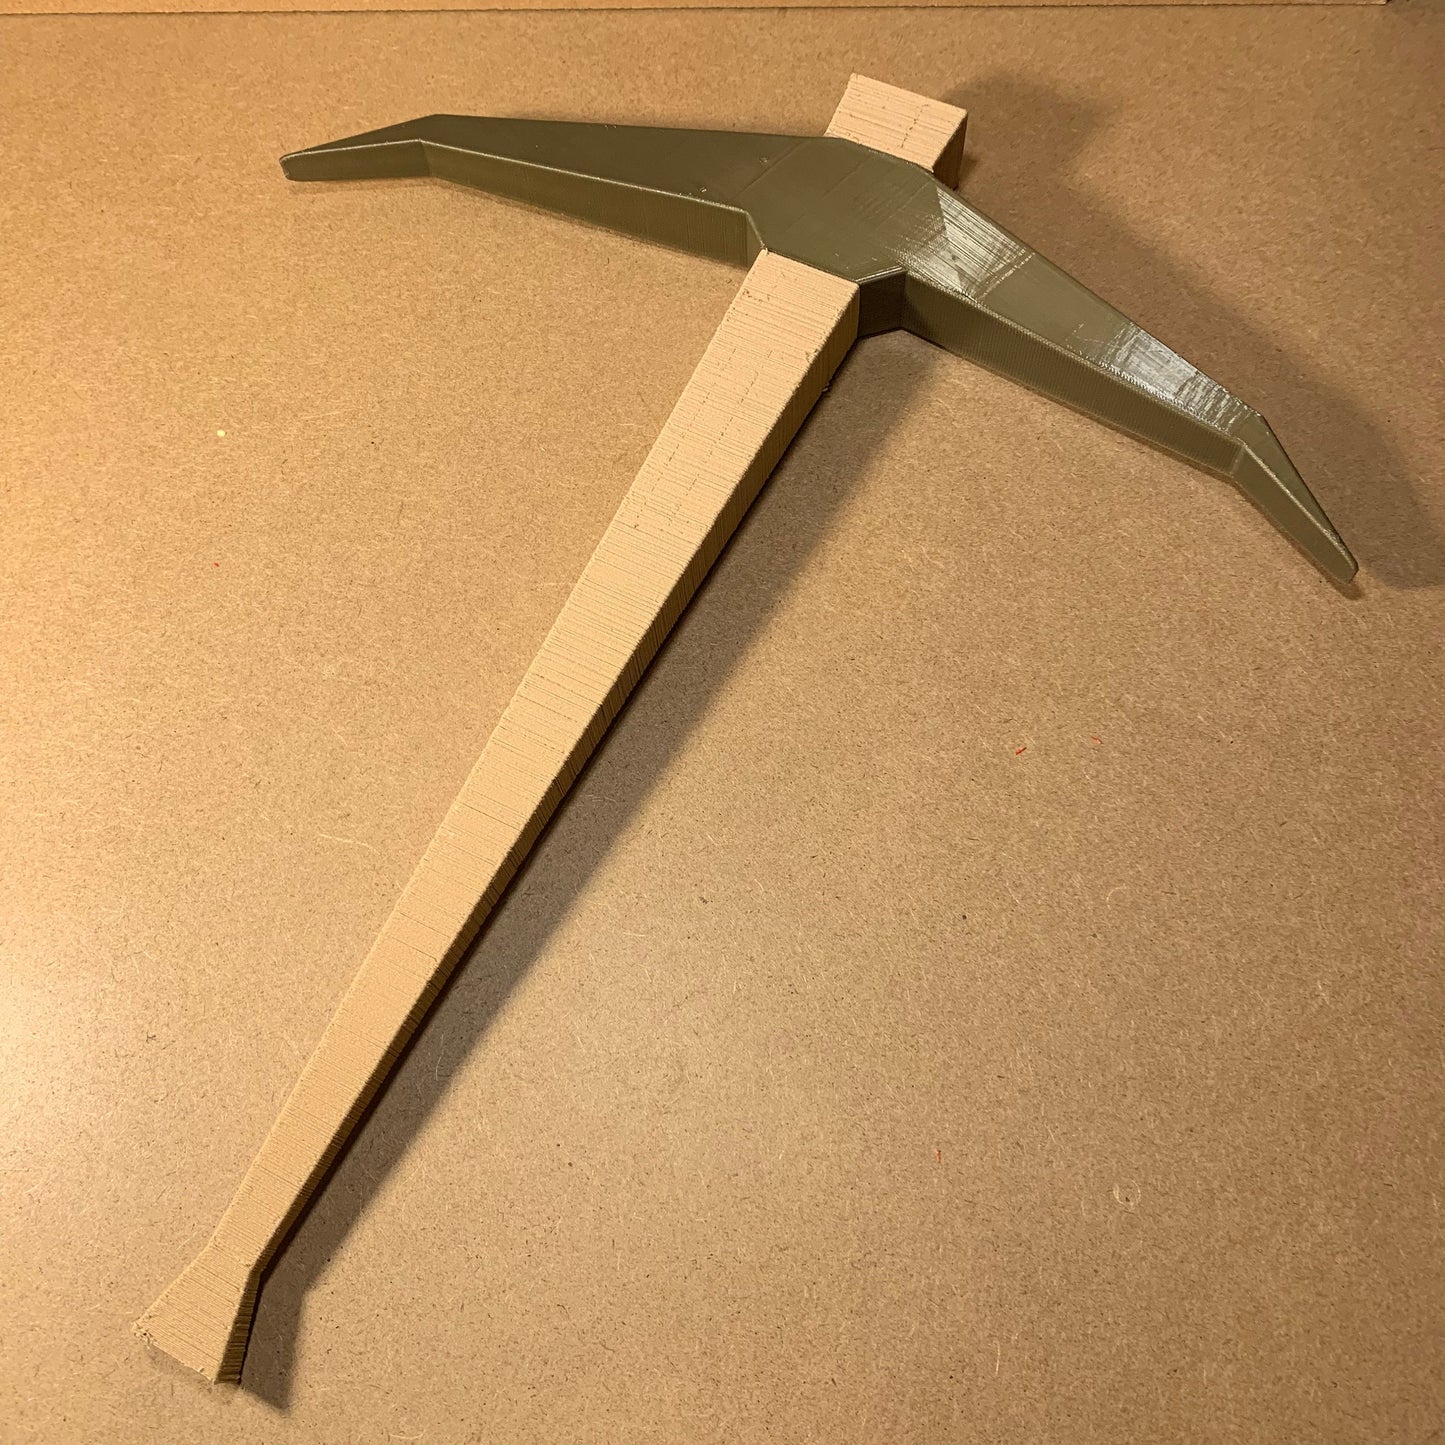 Mining Pickaxe / OSRS Style Pic Axe / Runescape RPG Cosplay Weapon / Full Actual Size / RS Costume